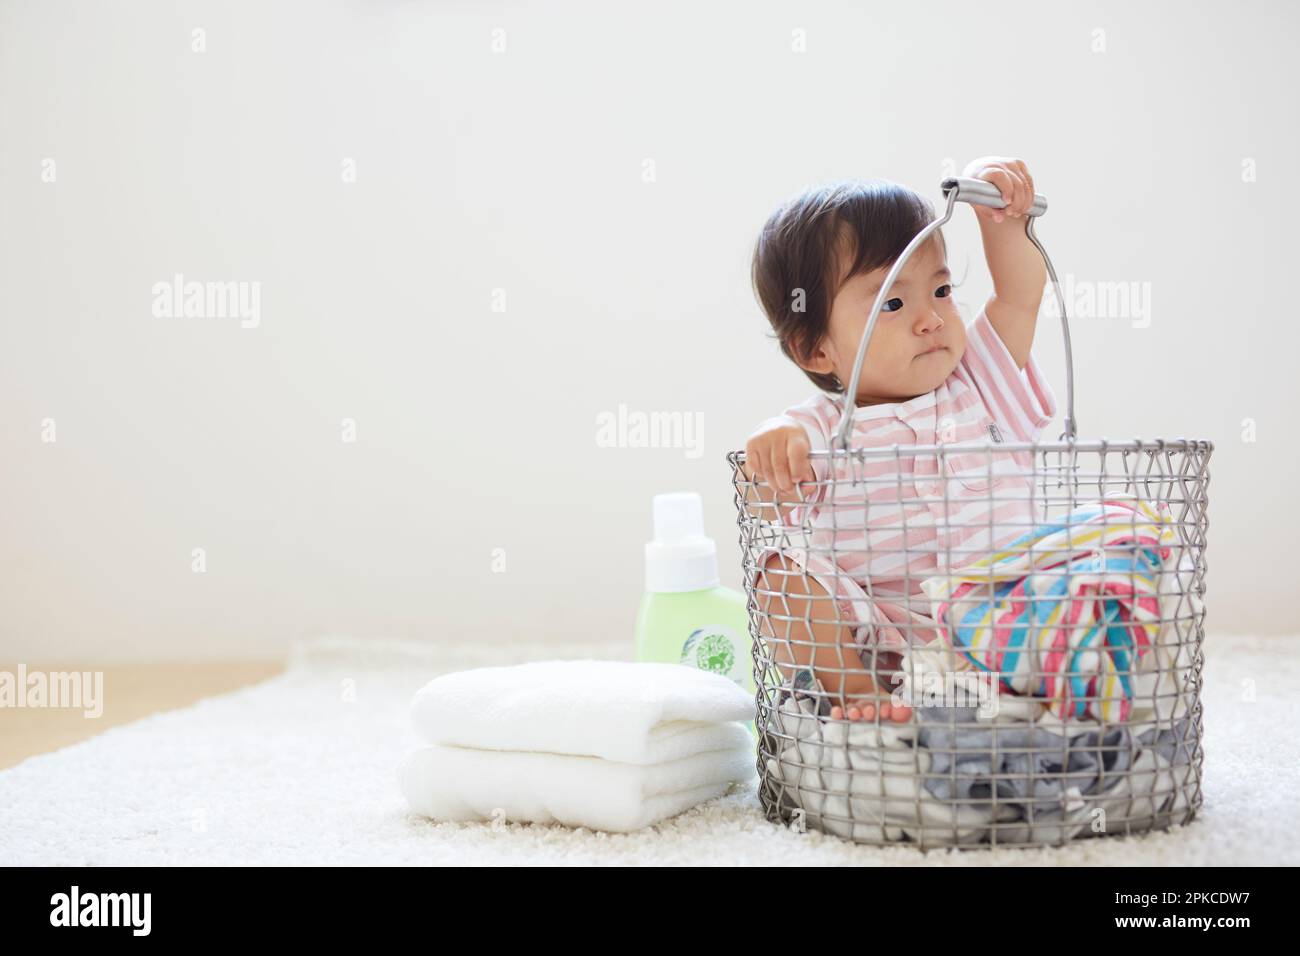 Baby in laundry basket with laundry Stock Photo